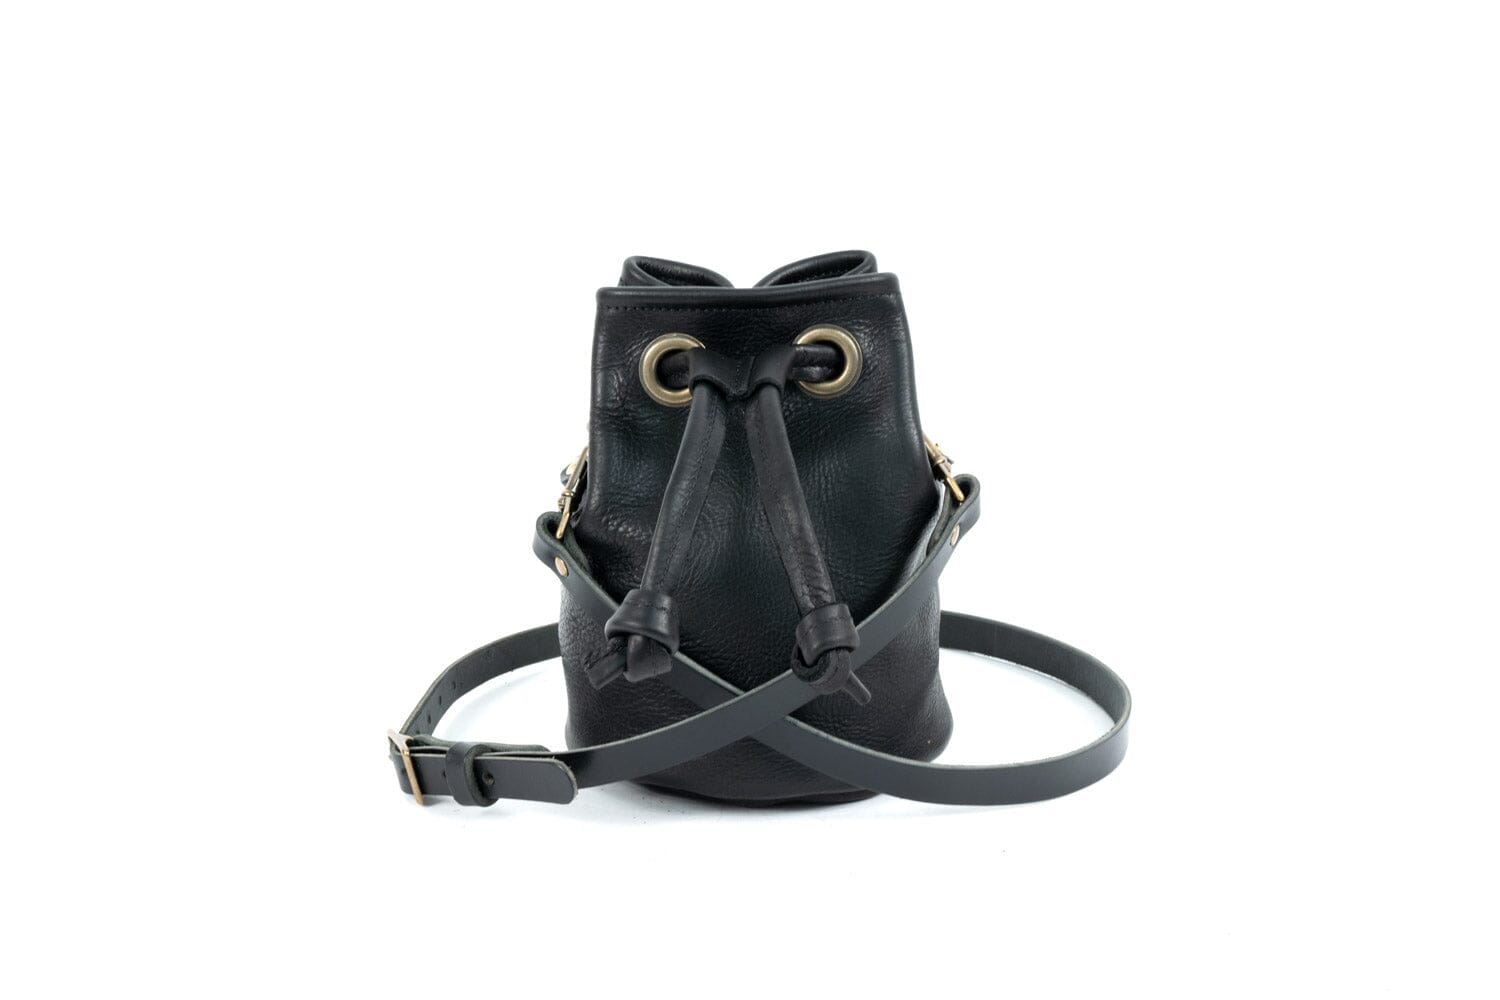 Go Forth Goods Leather Bucket Bag - Small - Black